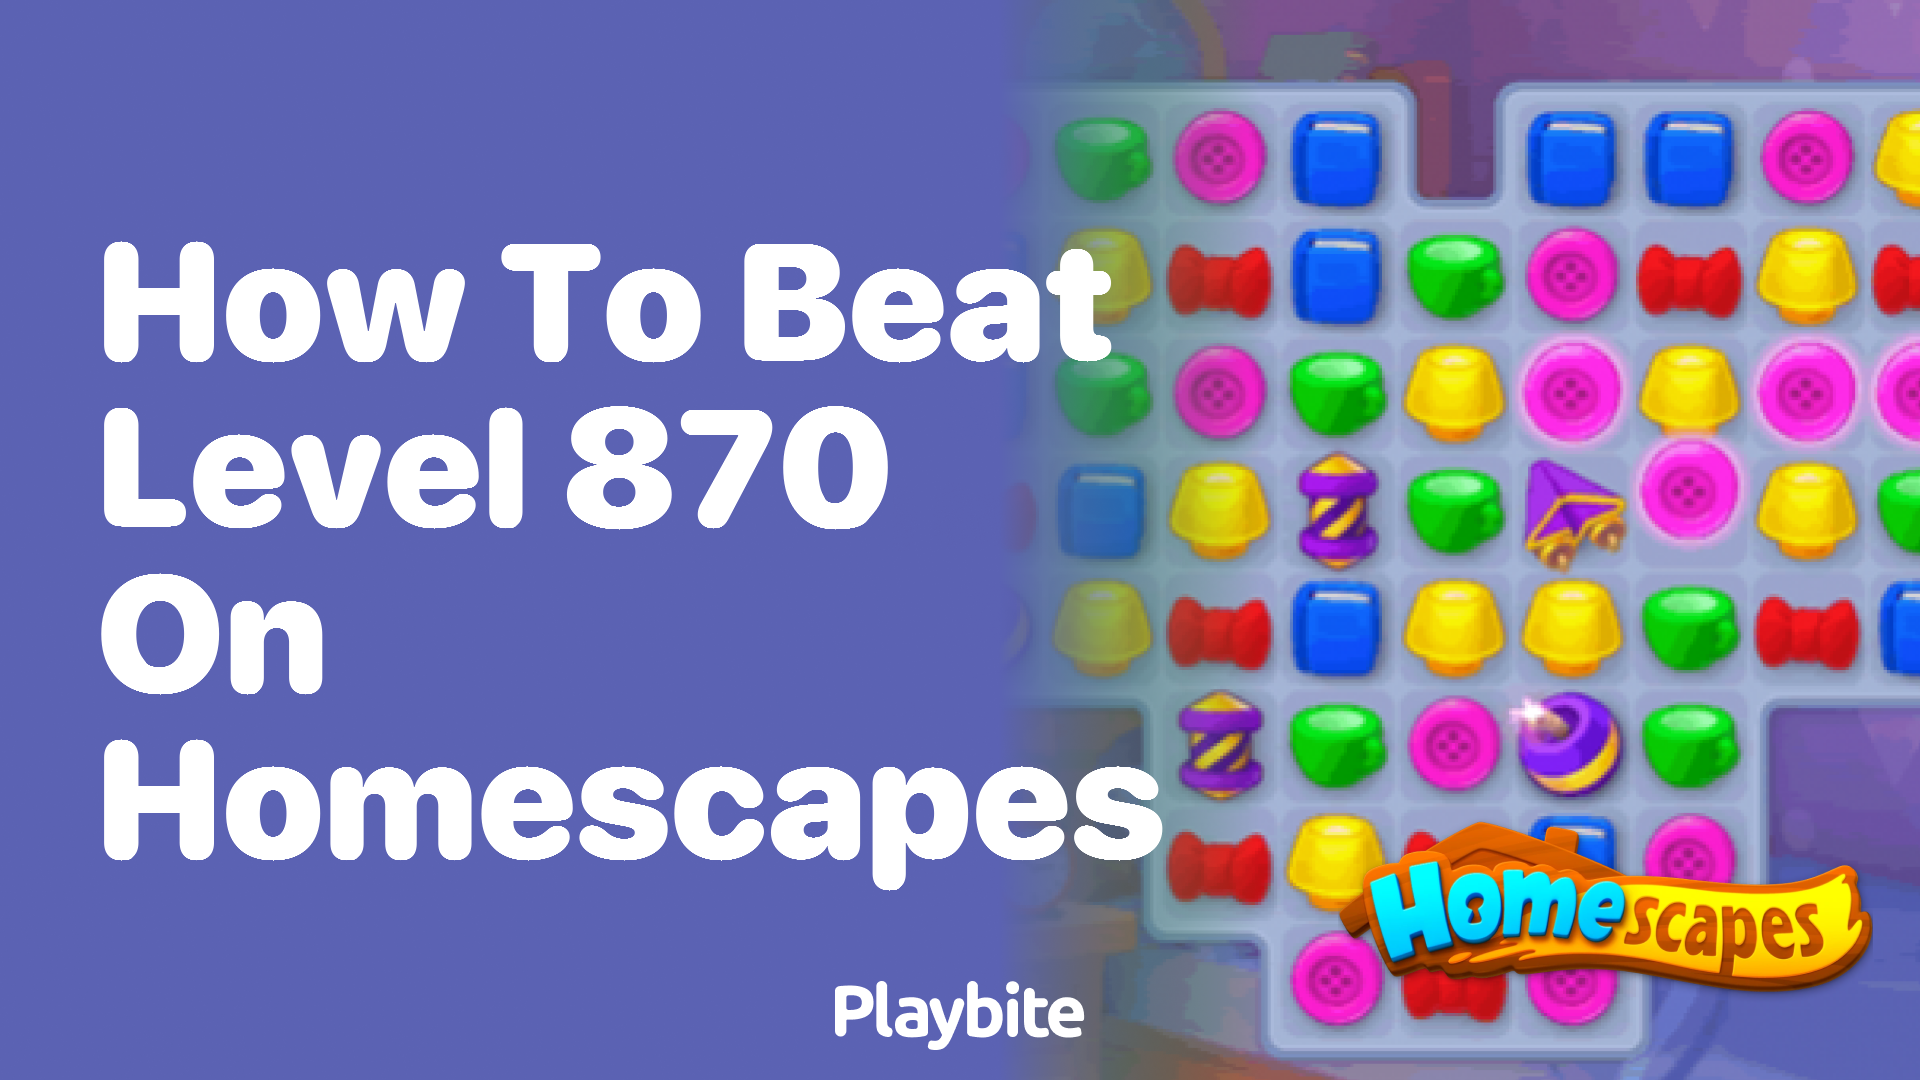 How to Beat Level 870 on Homescapes